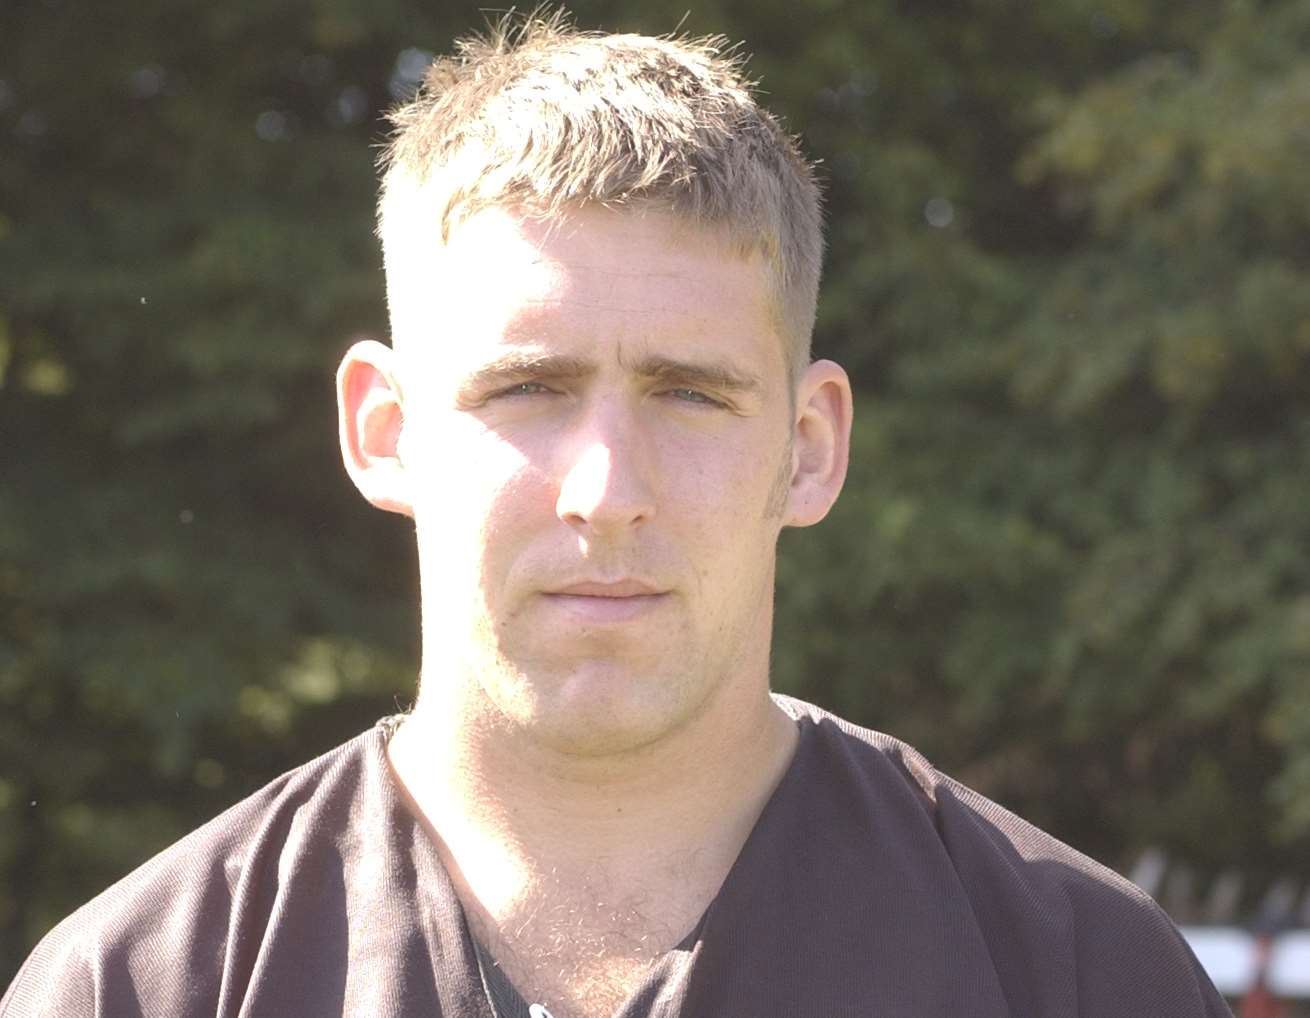 Shaun Tandy was captain of Lordswood RFC